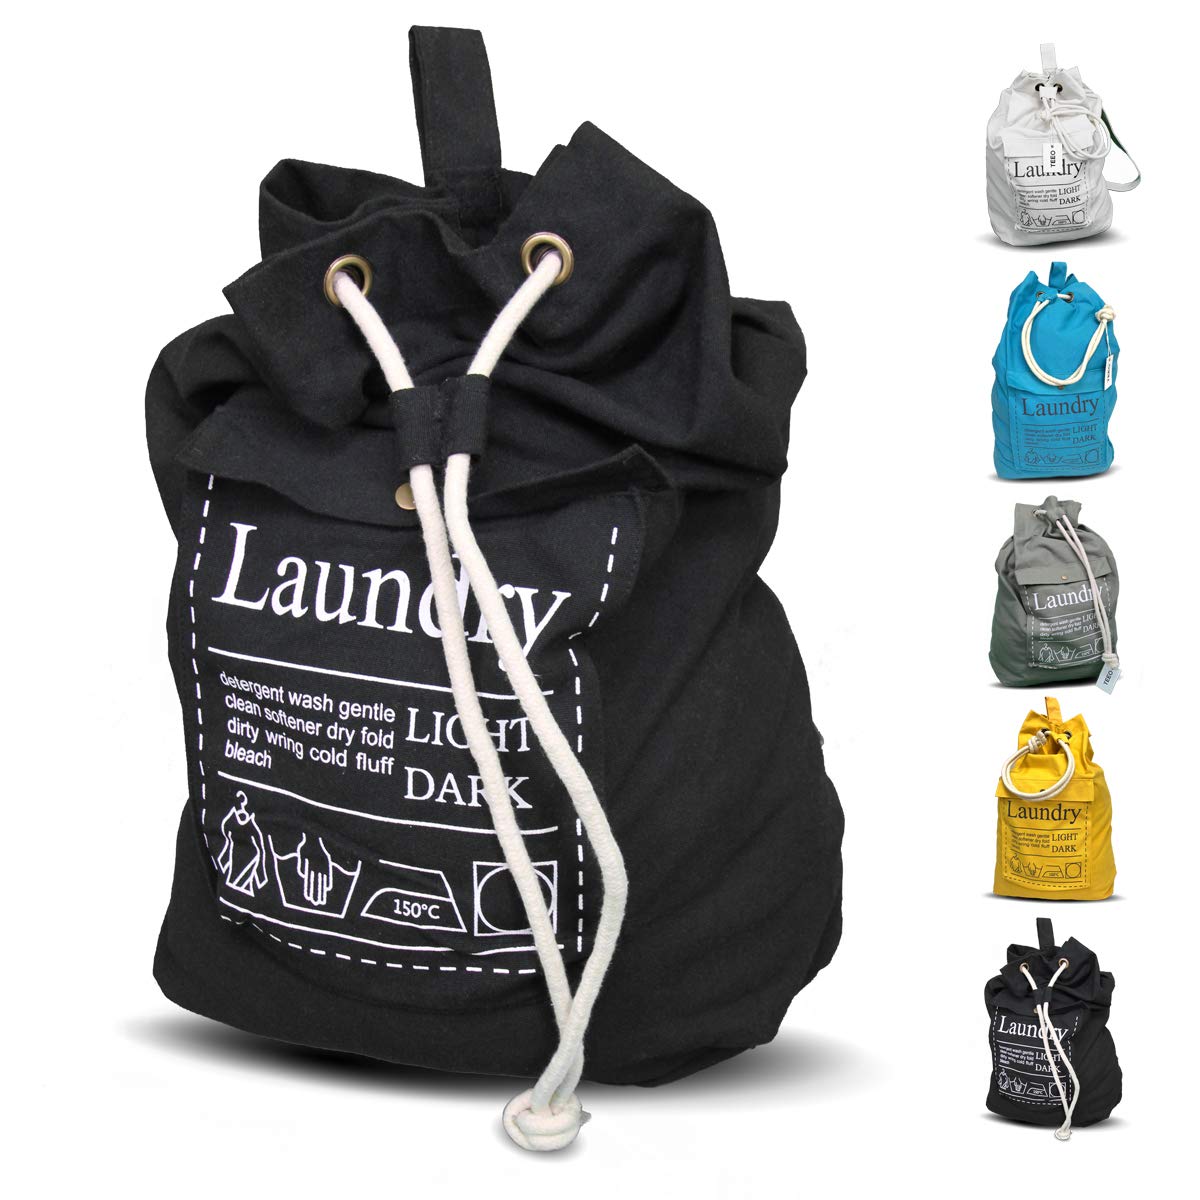  Mesh Laundry Bag - 3 Pack Durable and Reusable Wash